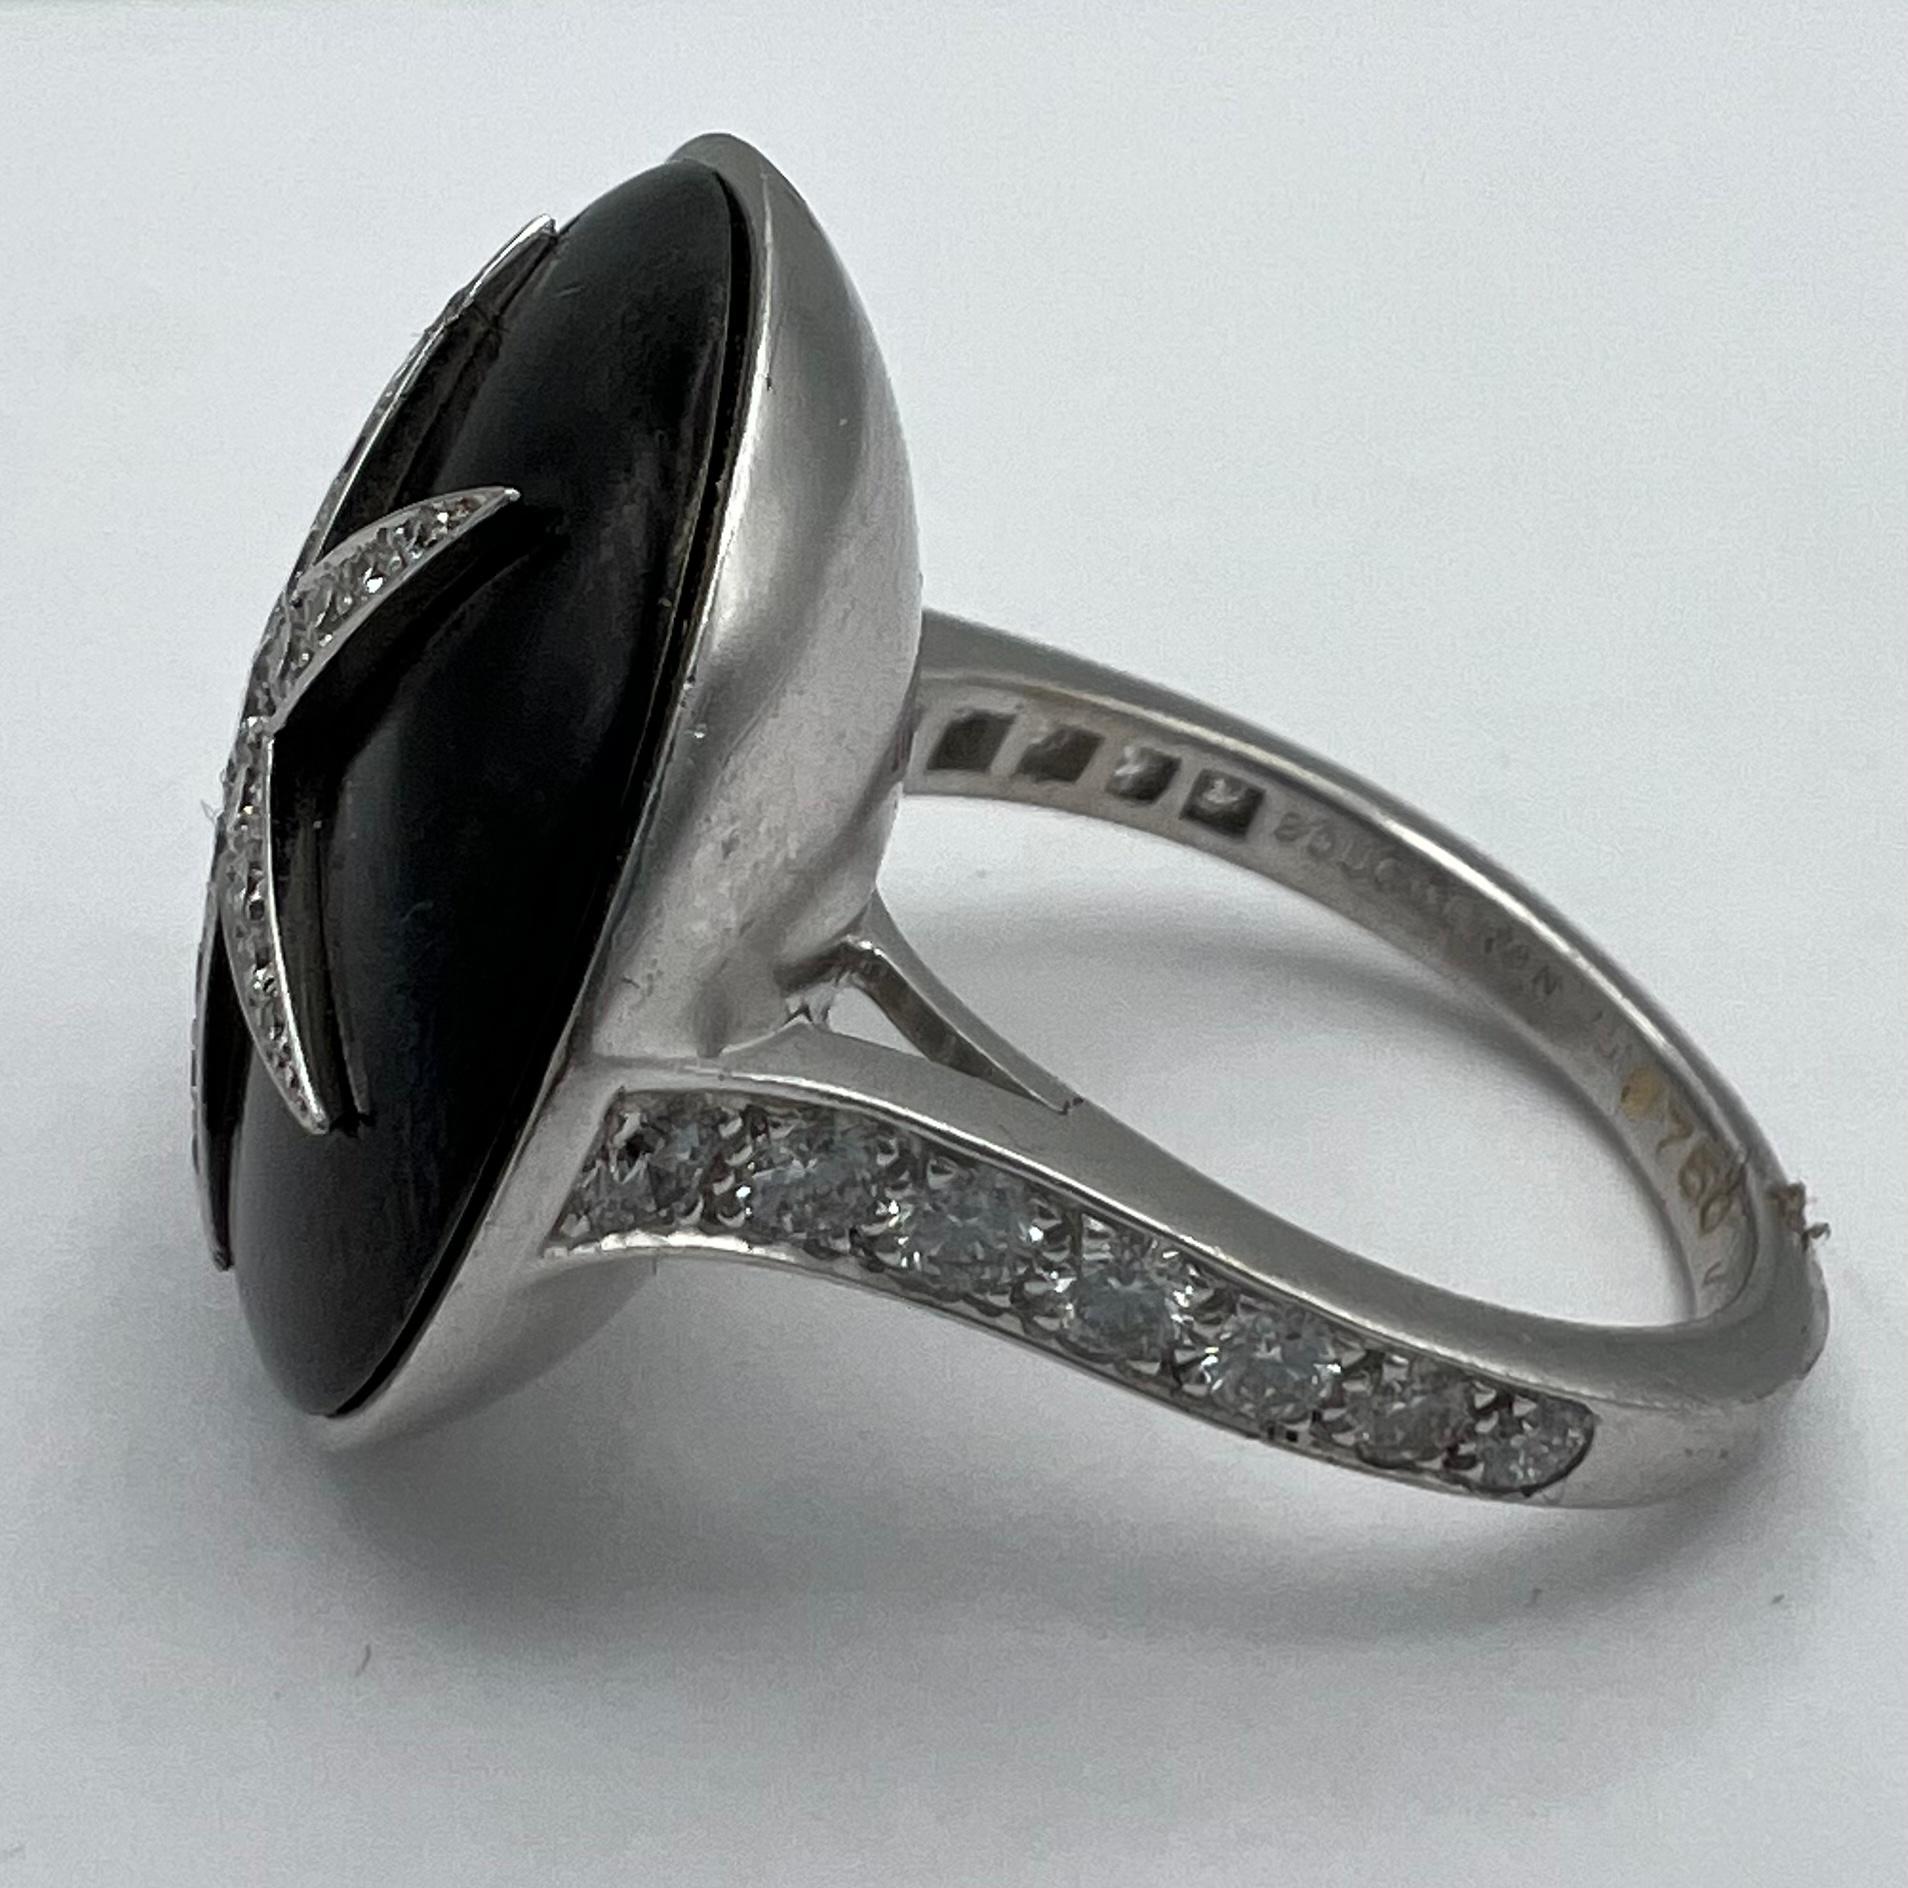 Vintage Boucheron Star Onyx Diamond Ring In Excellent Condition For Sale In Beverly Hills, CA